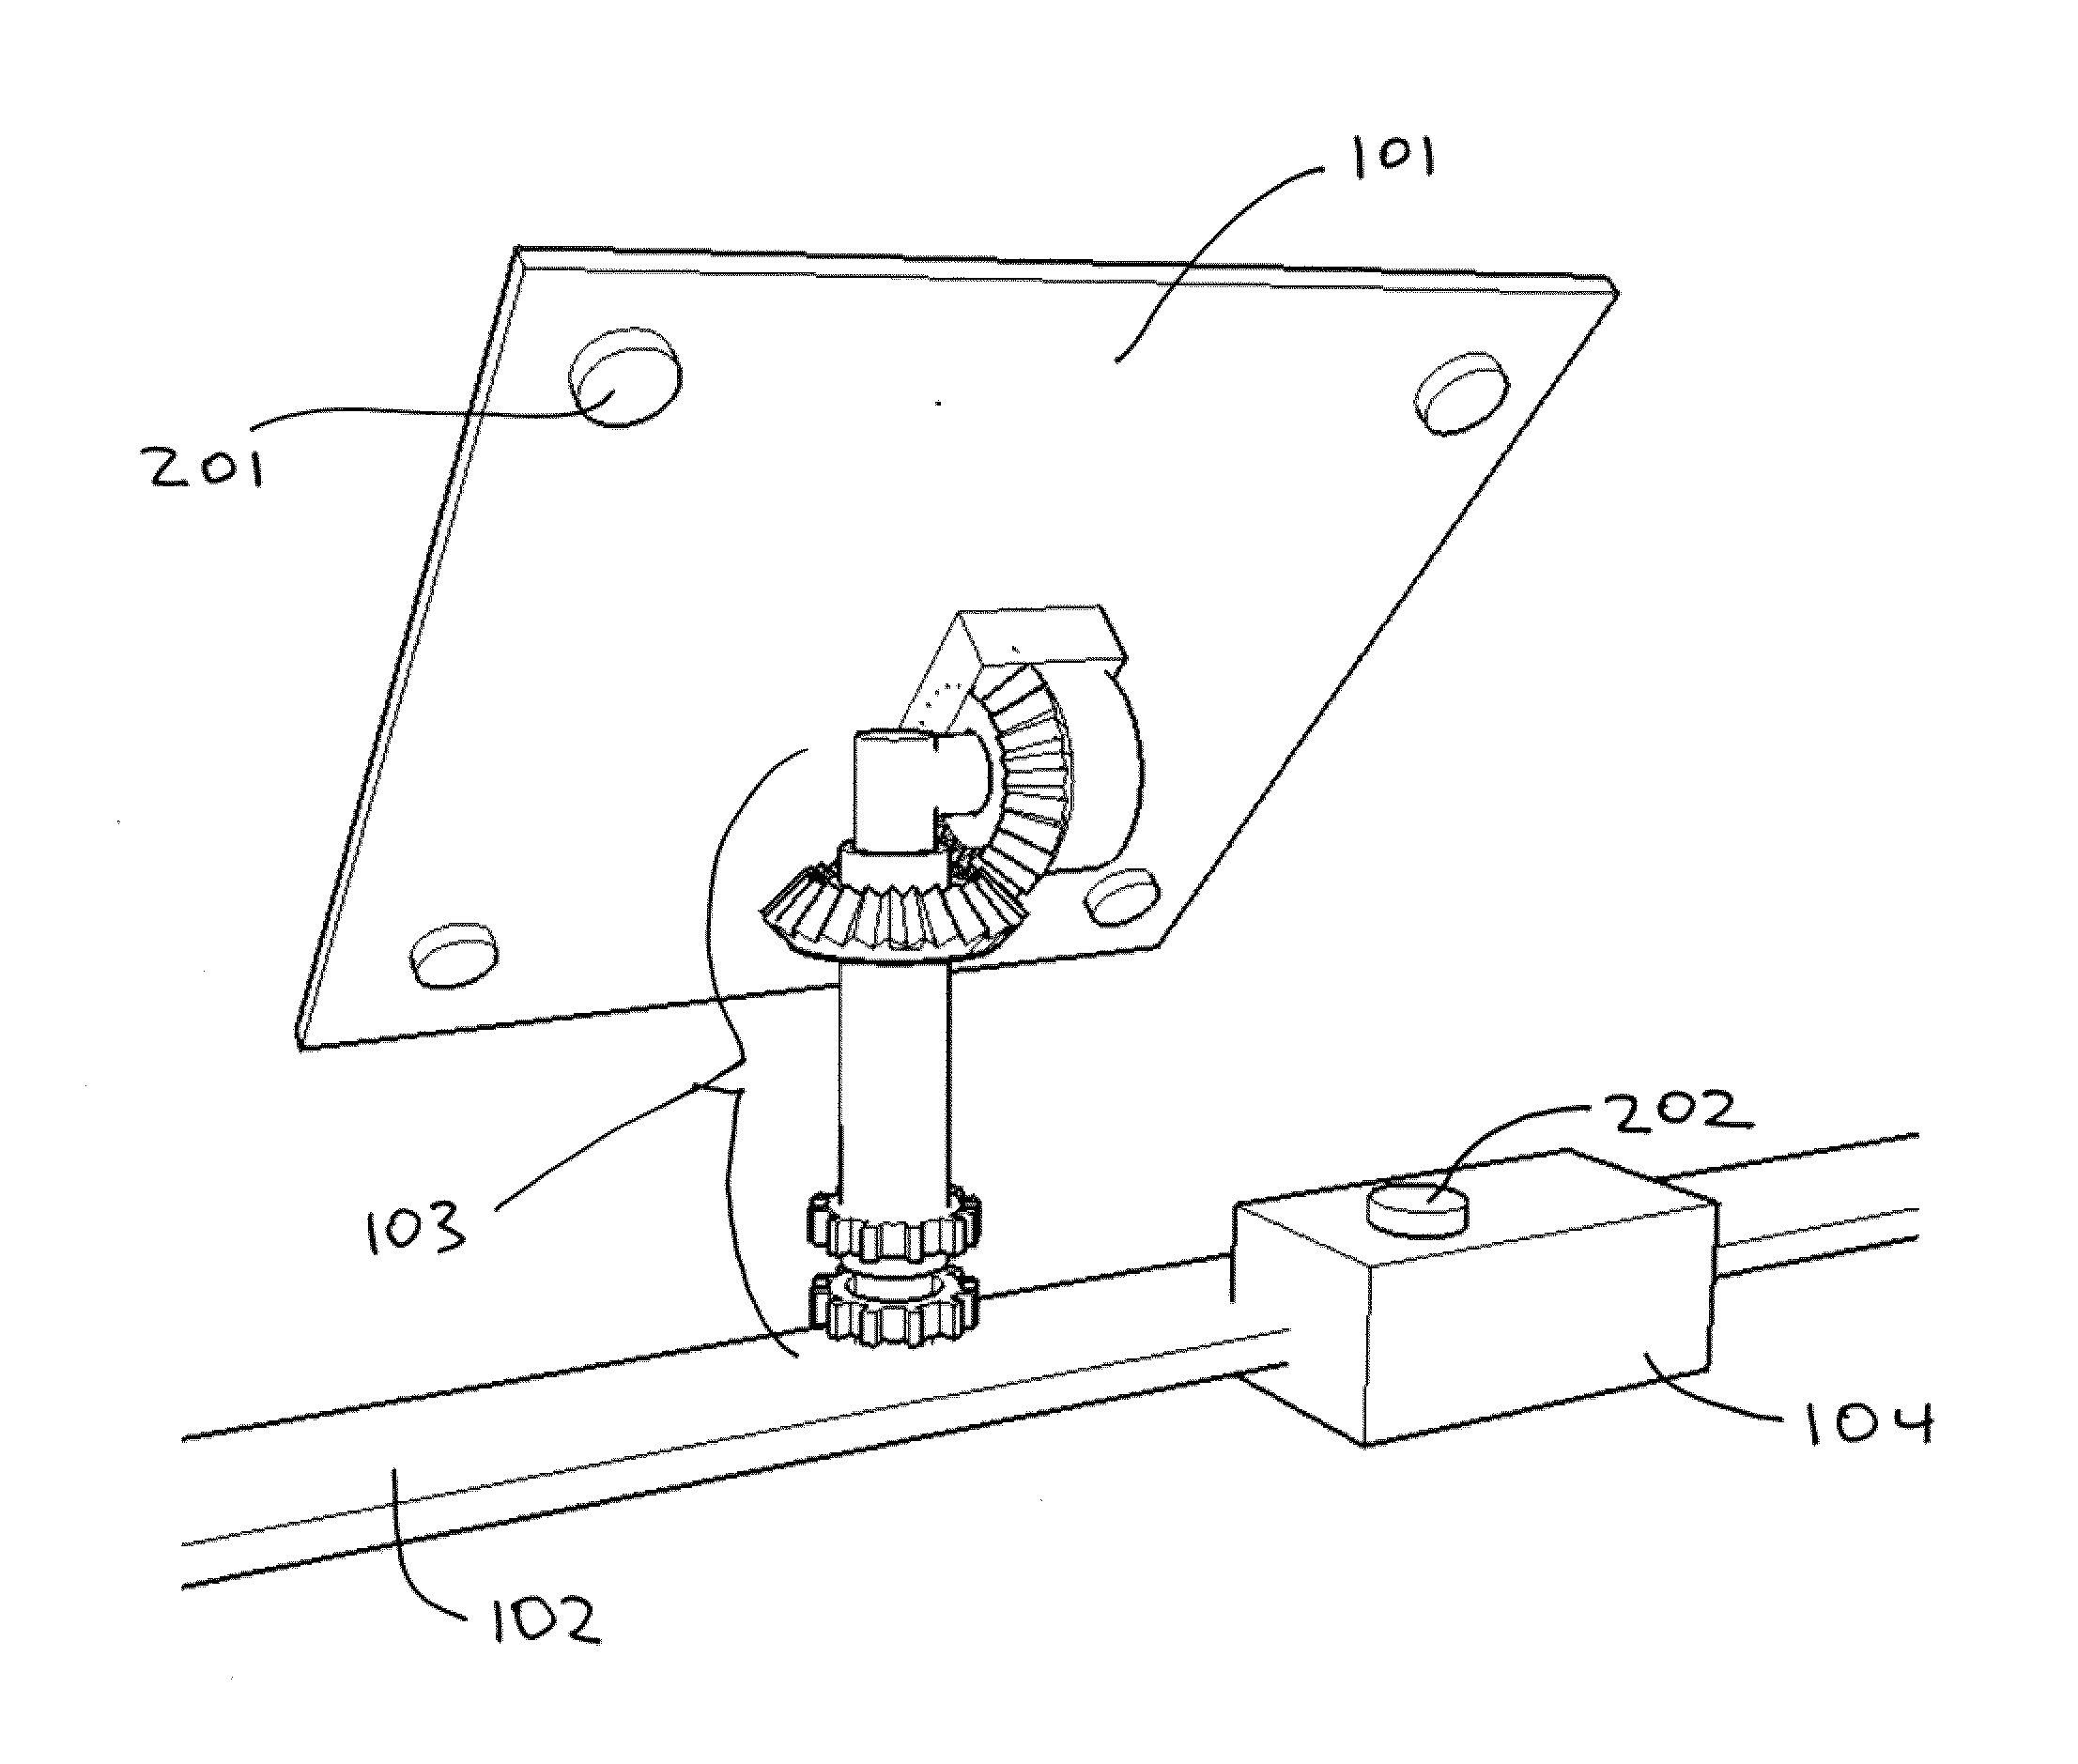 Heliostat repositioning system and method